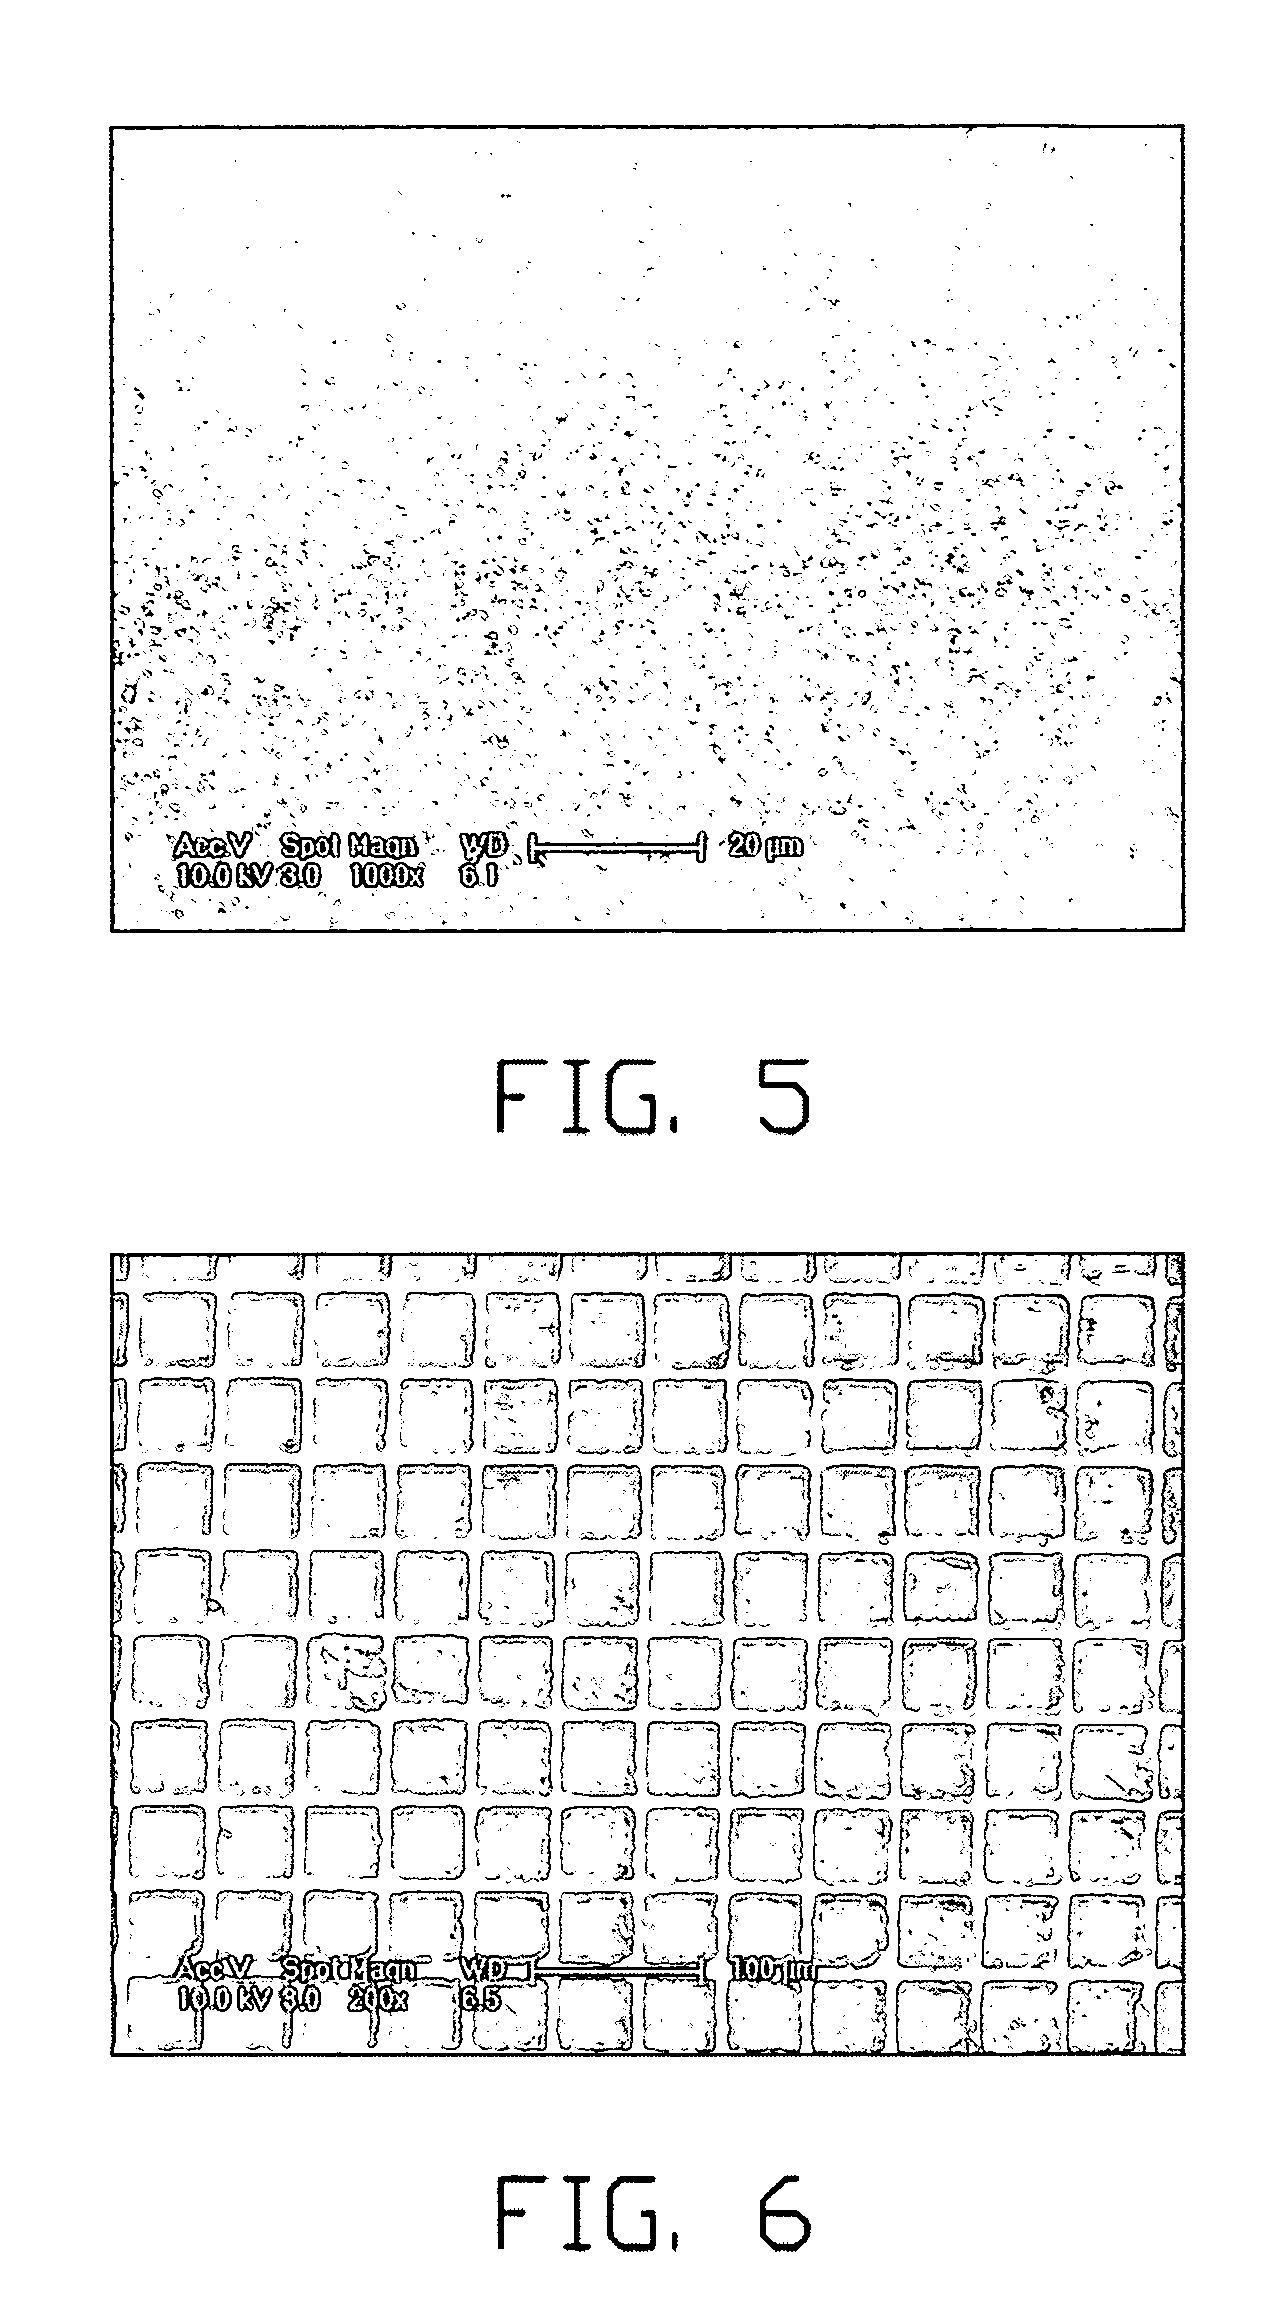 Method for forming a patterned array of carbon nanotubes